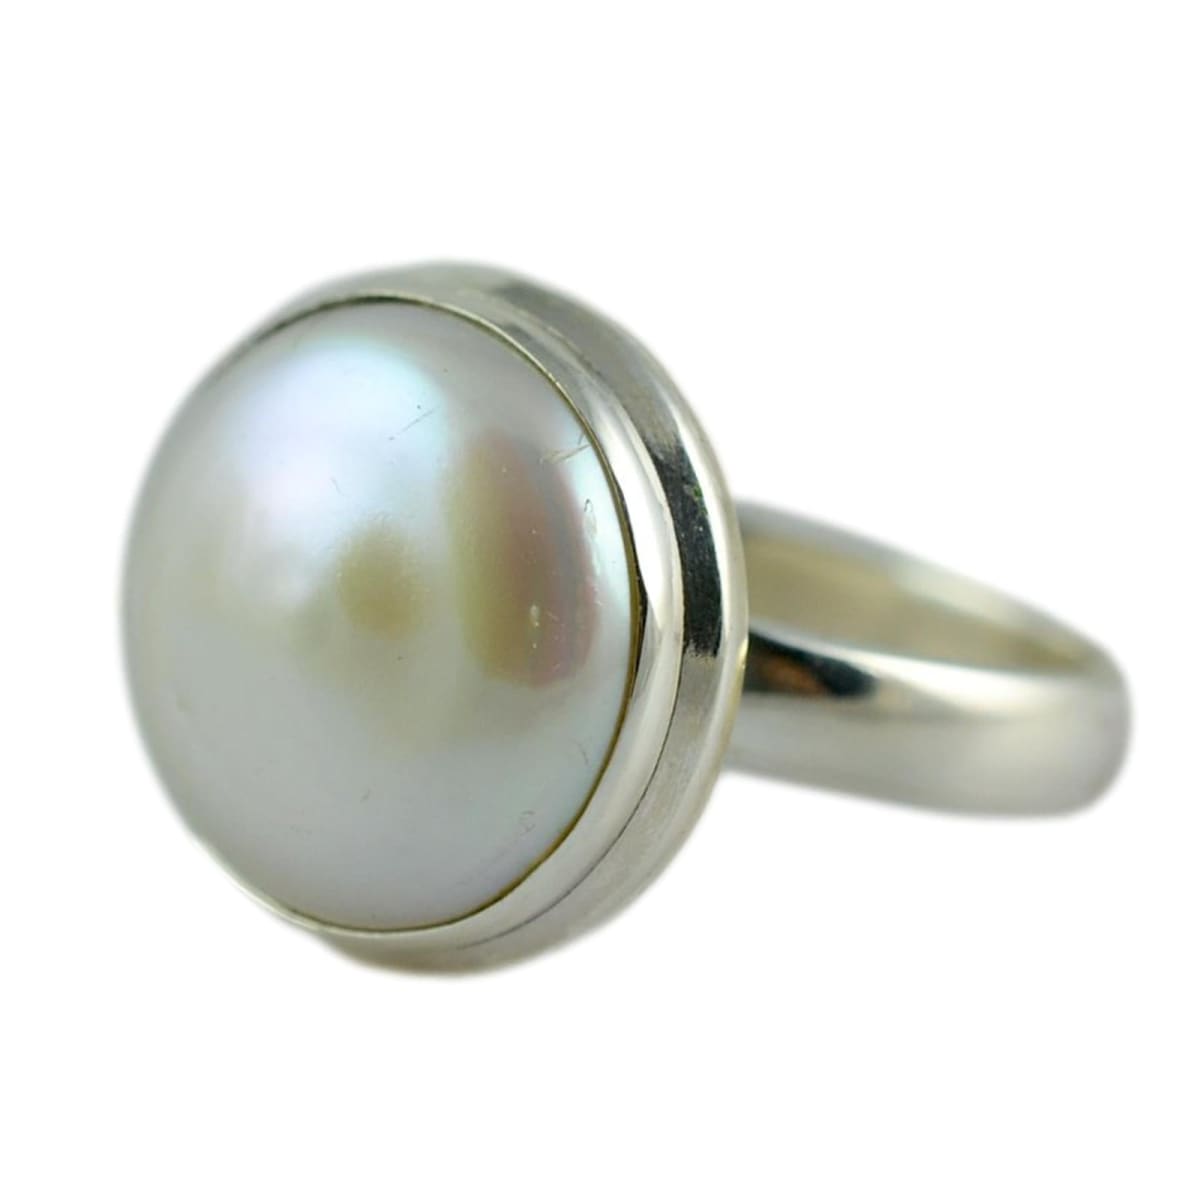 Benefits of wearing south sea pearls